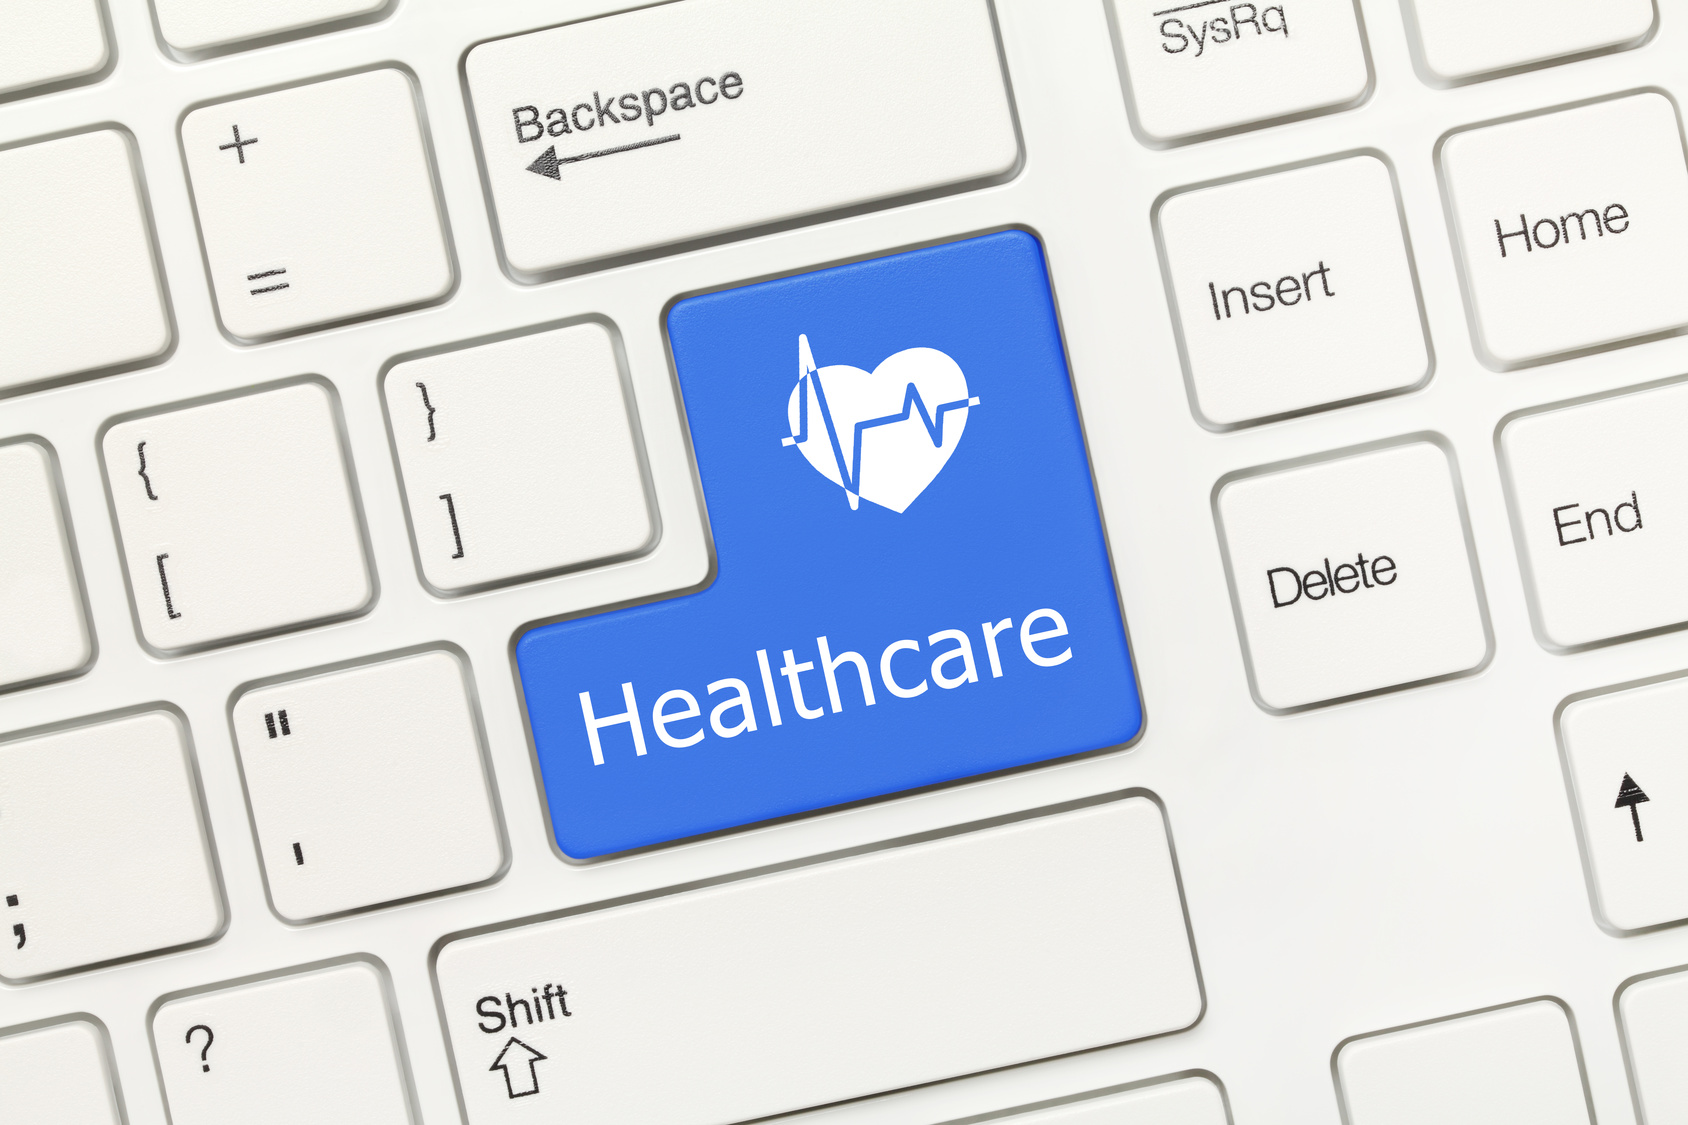 Health Care: Internet Use is Good, but Much More Needed